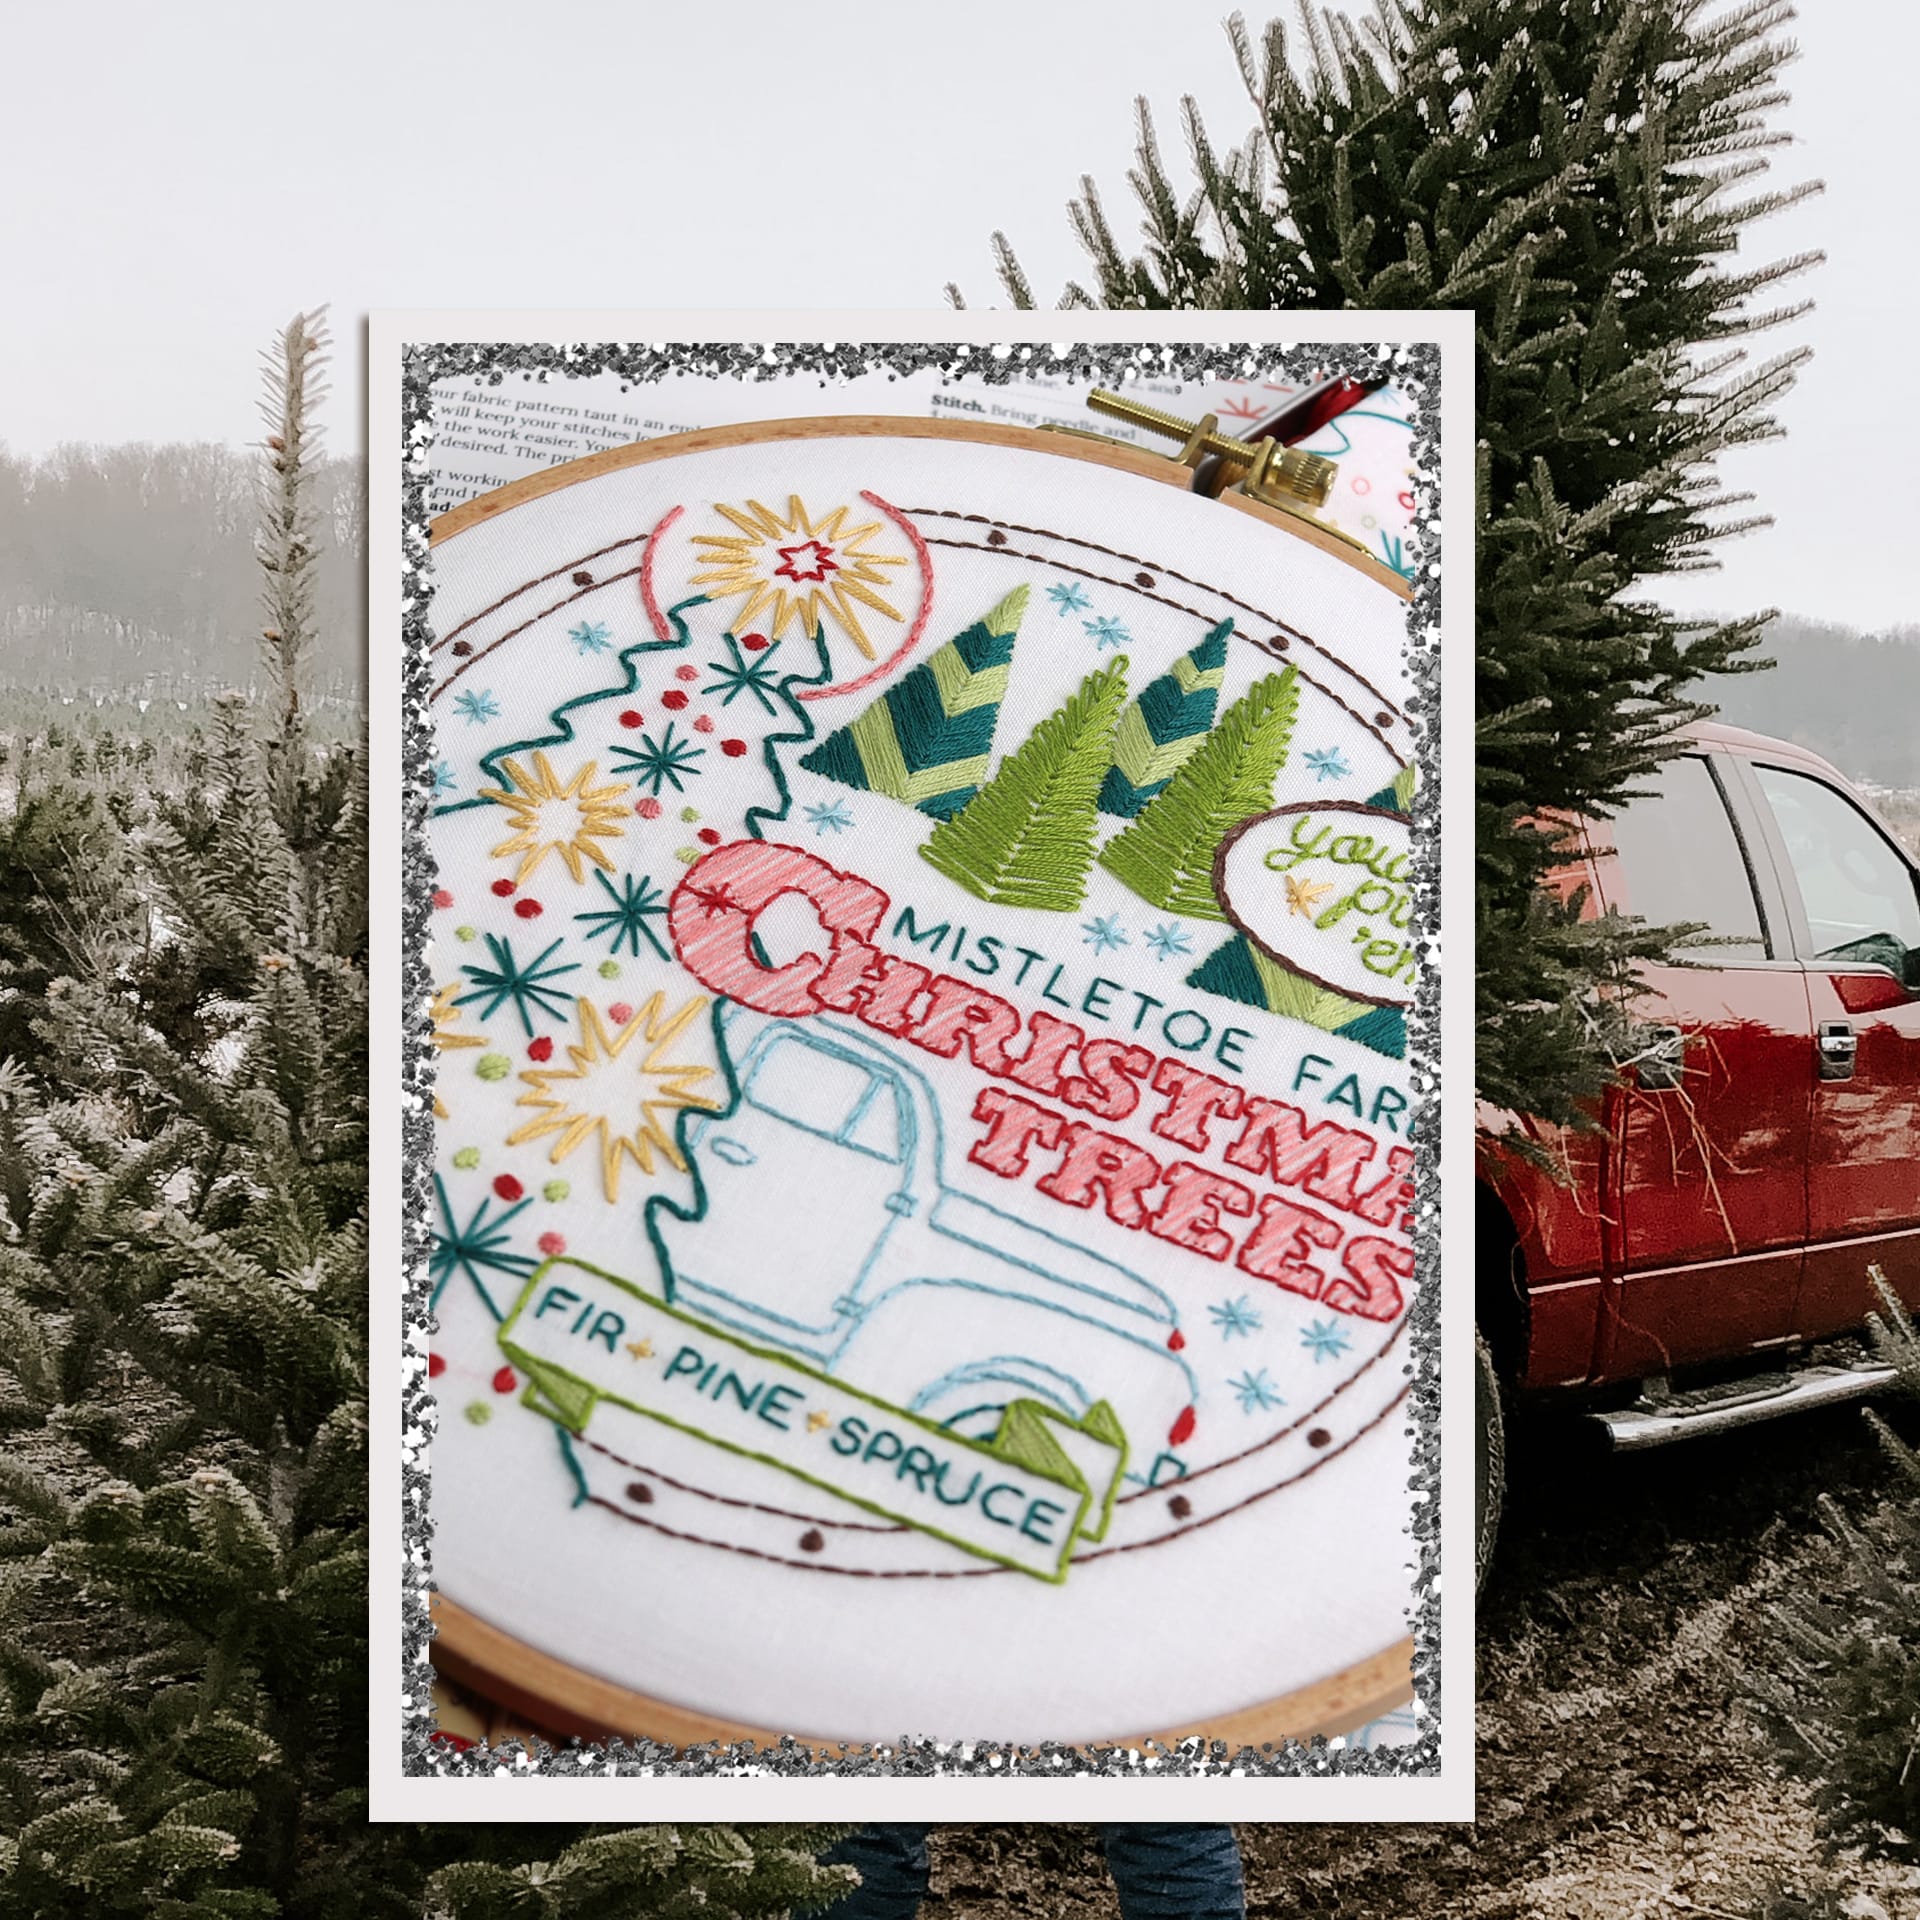 embroidered Christmas trees and vintage truck inspired by a visit to the Christmas tree farm